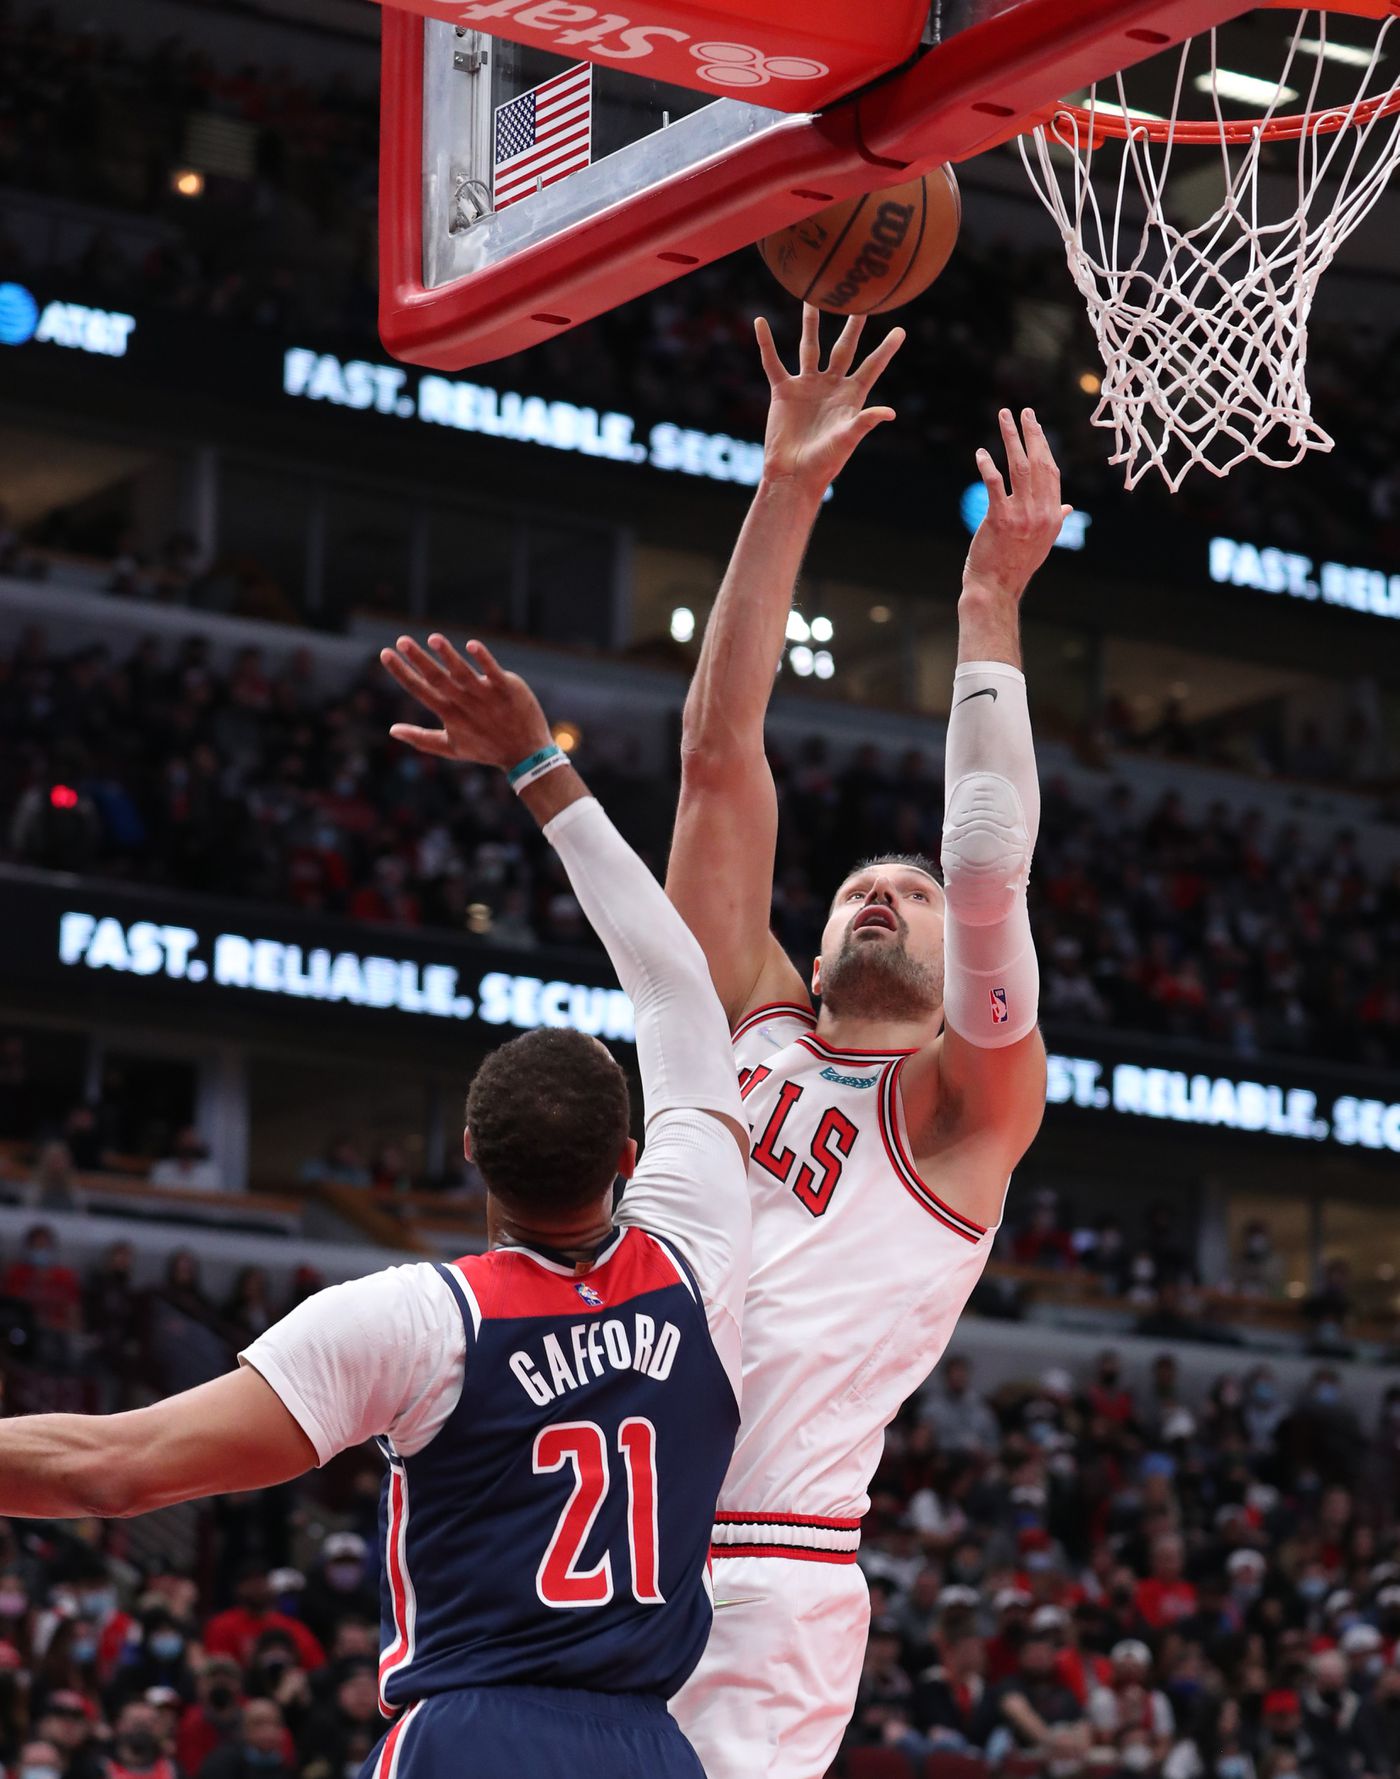 Chicago Bulls center Nikola Vucevic (9) makes a layup as Washington Wizards center Daniel Gafford (21) defends in the first quarter at United Center on Jan. 7, 2022, in Chicago.